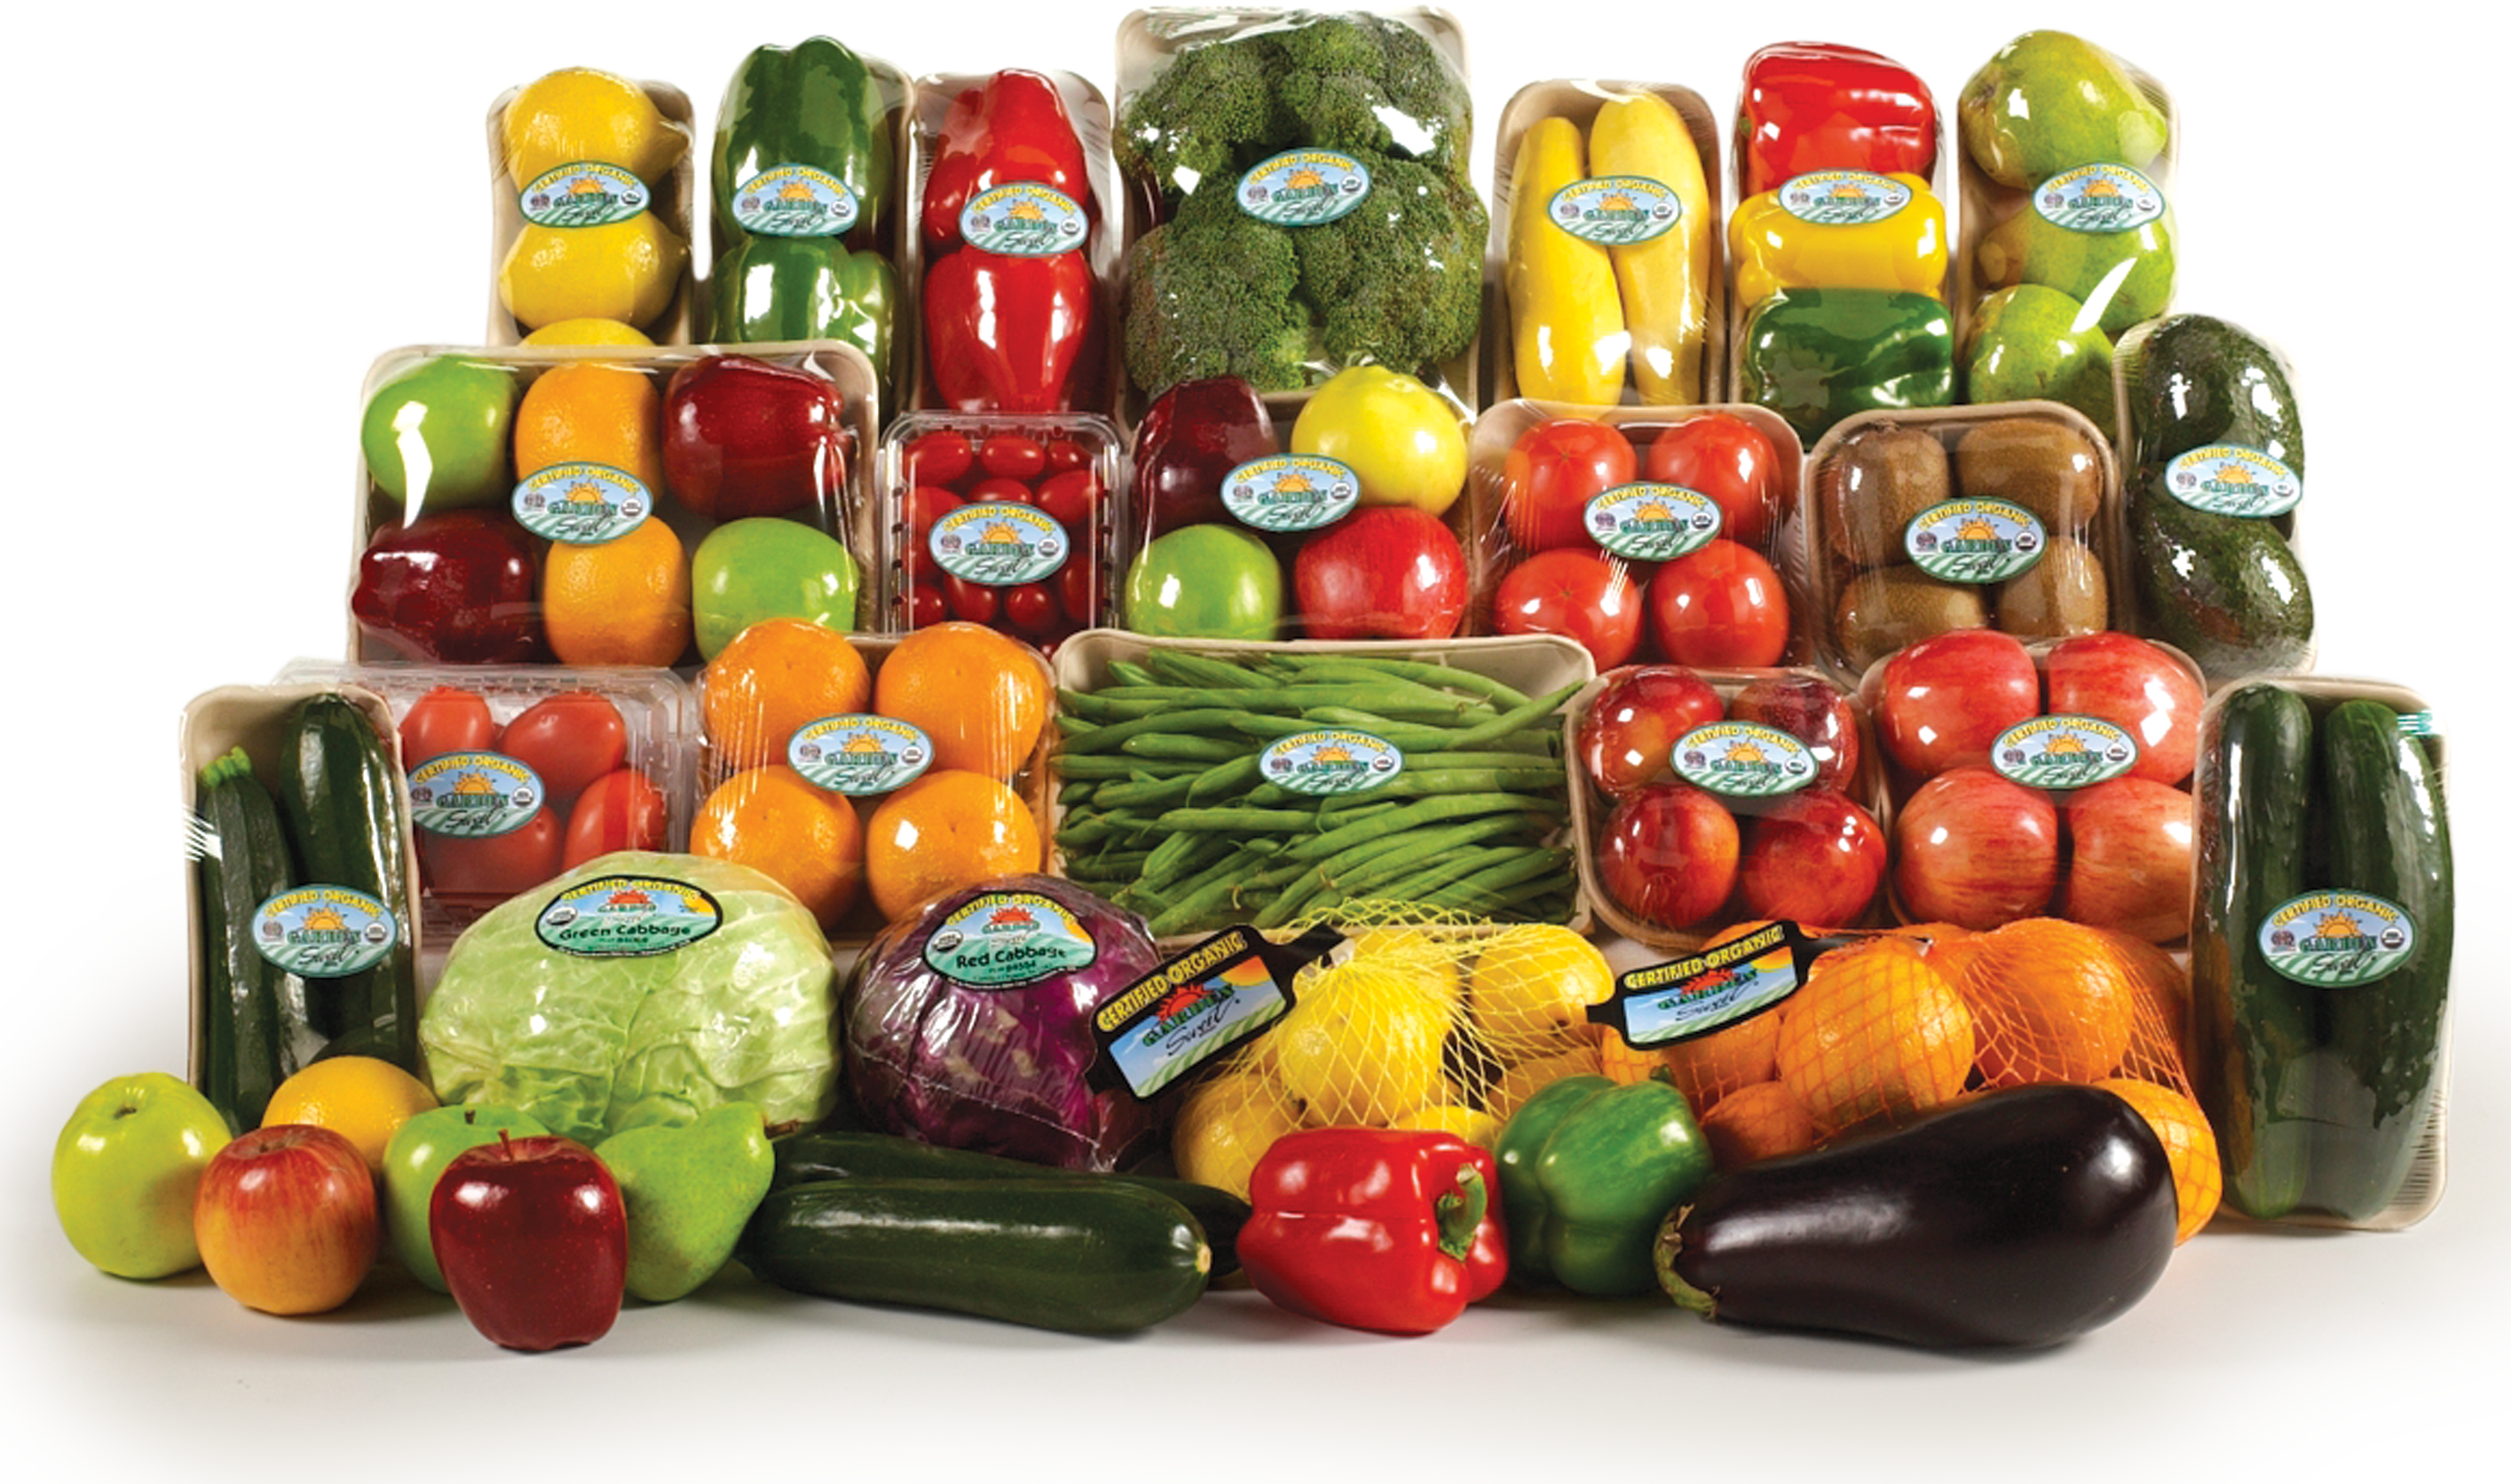 Packaged produce